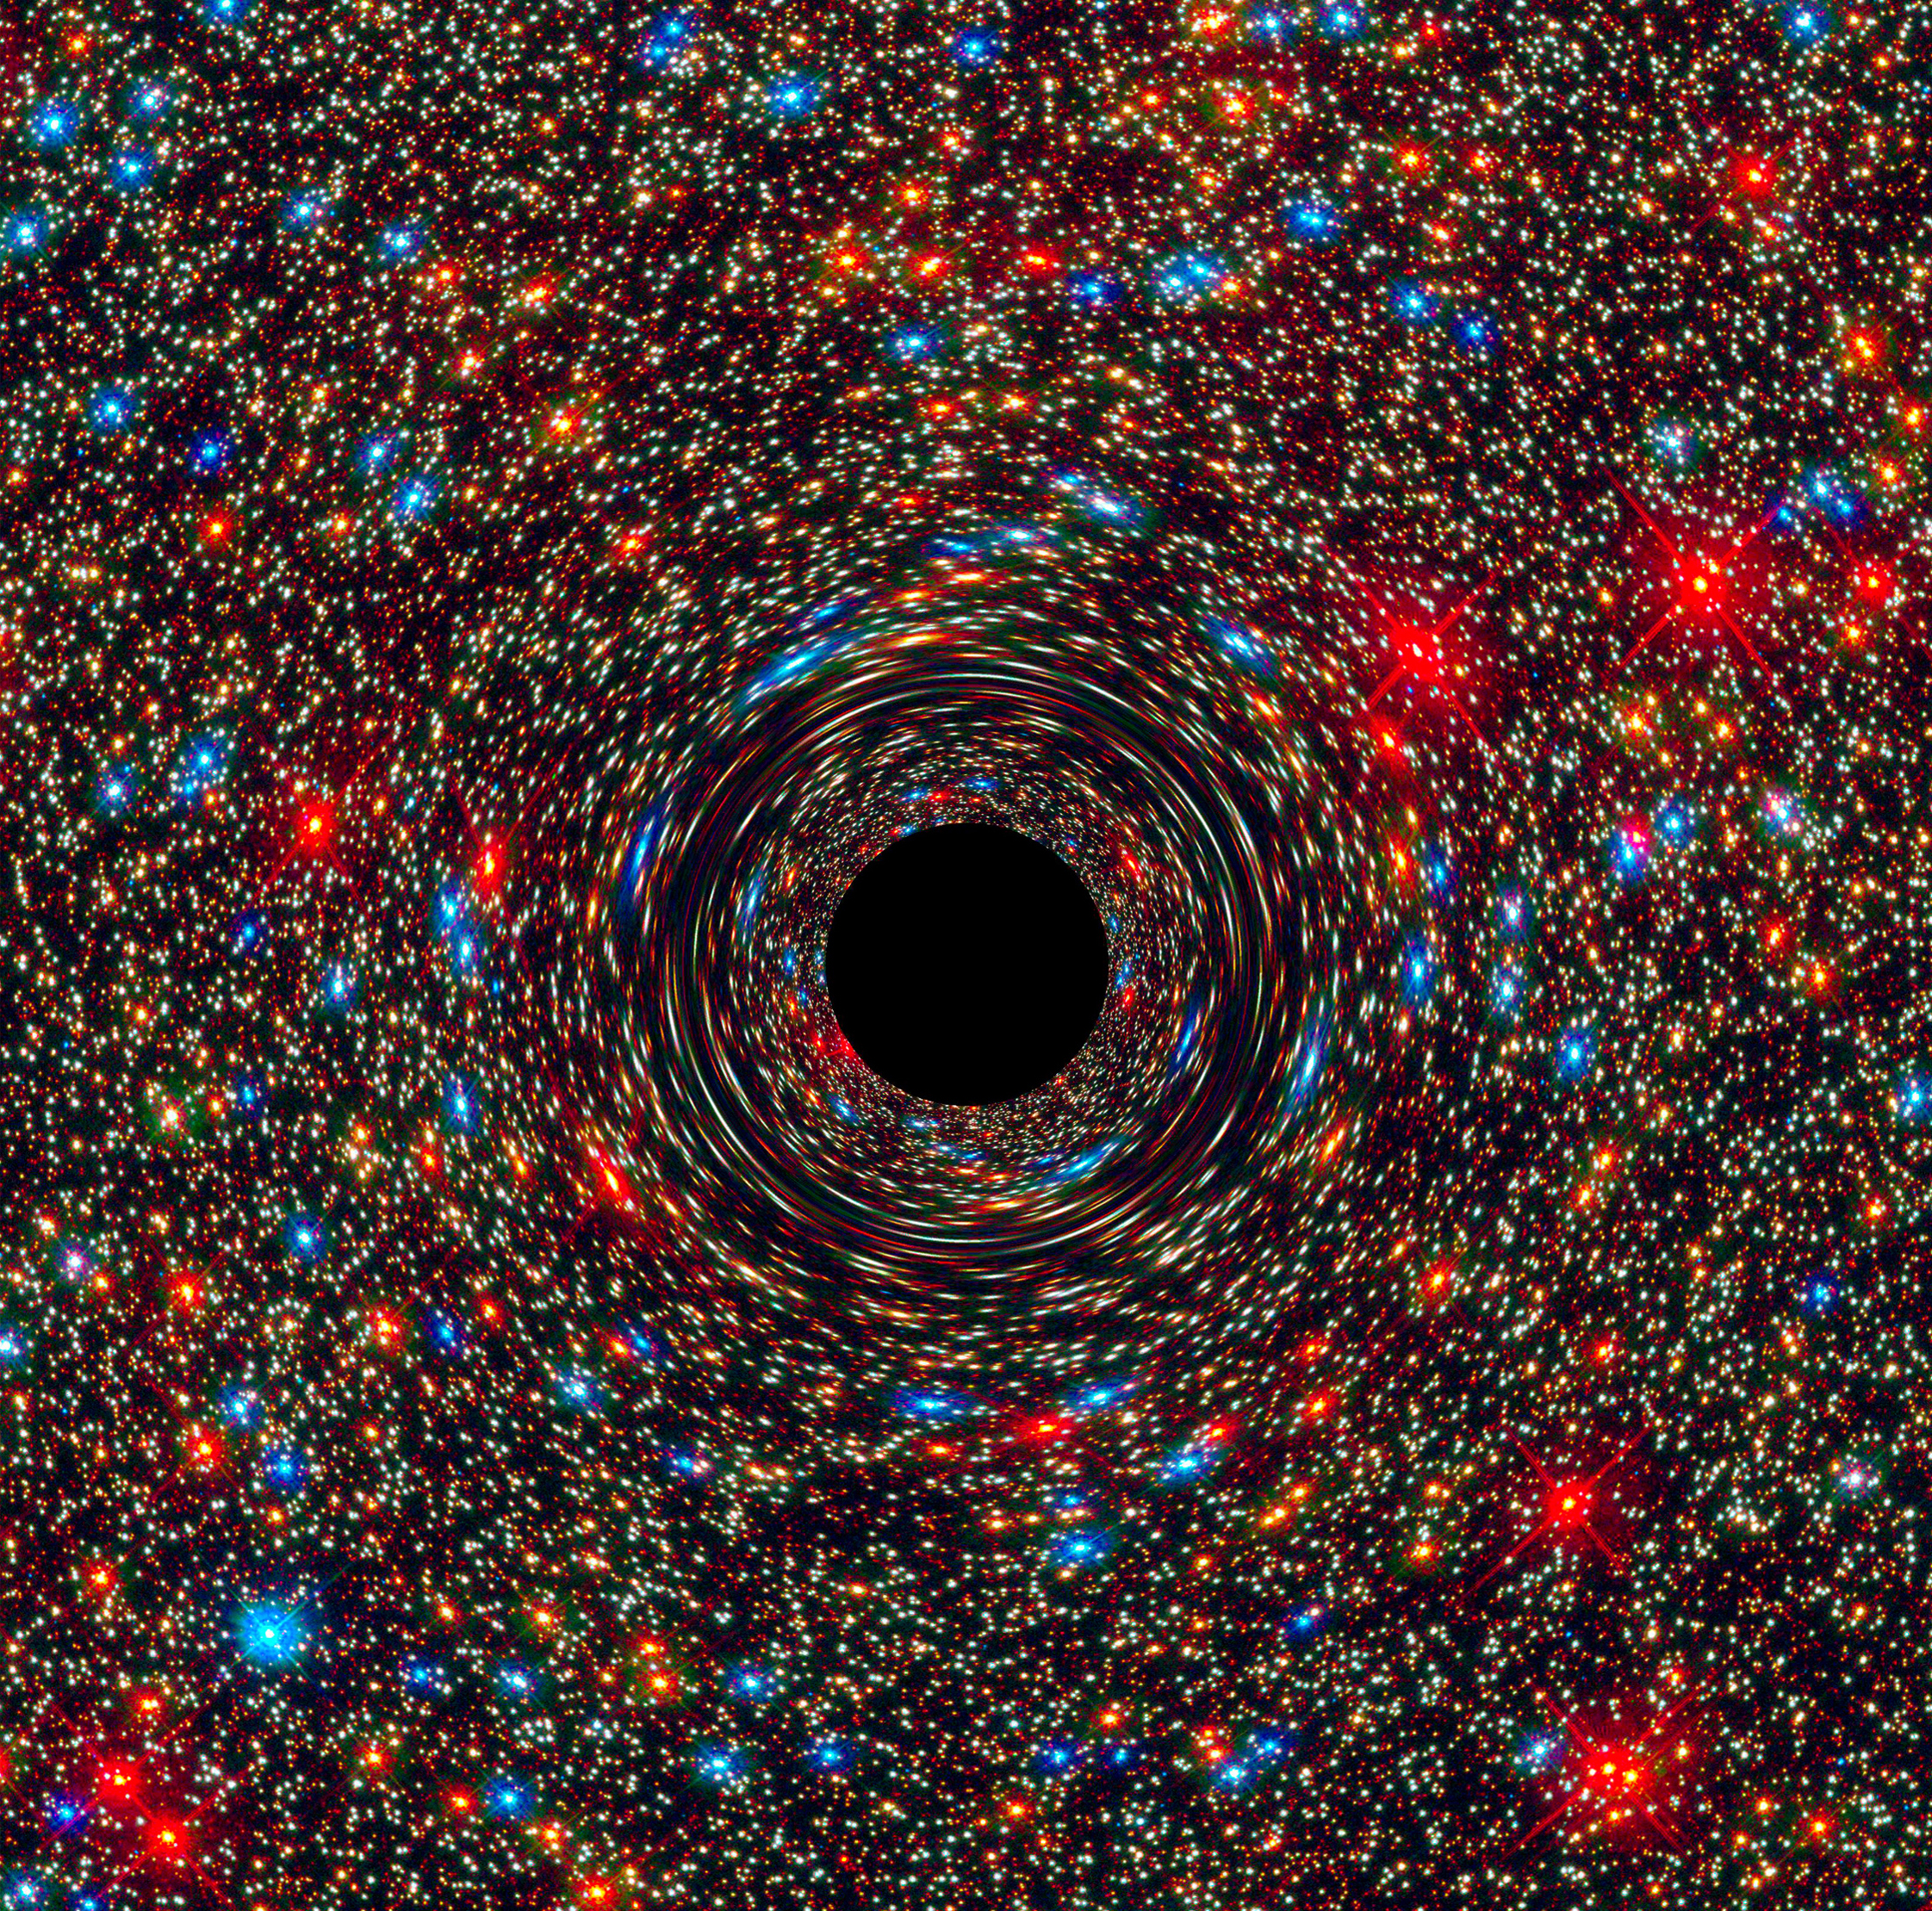 Something Very Strange Is Happening With This Supermassive Black Hole